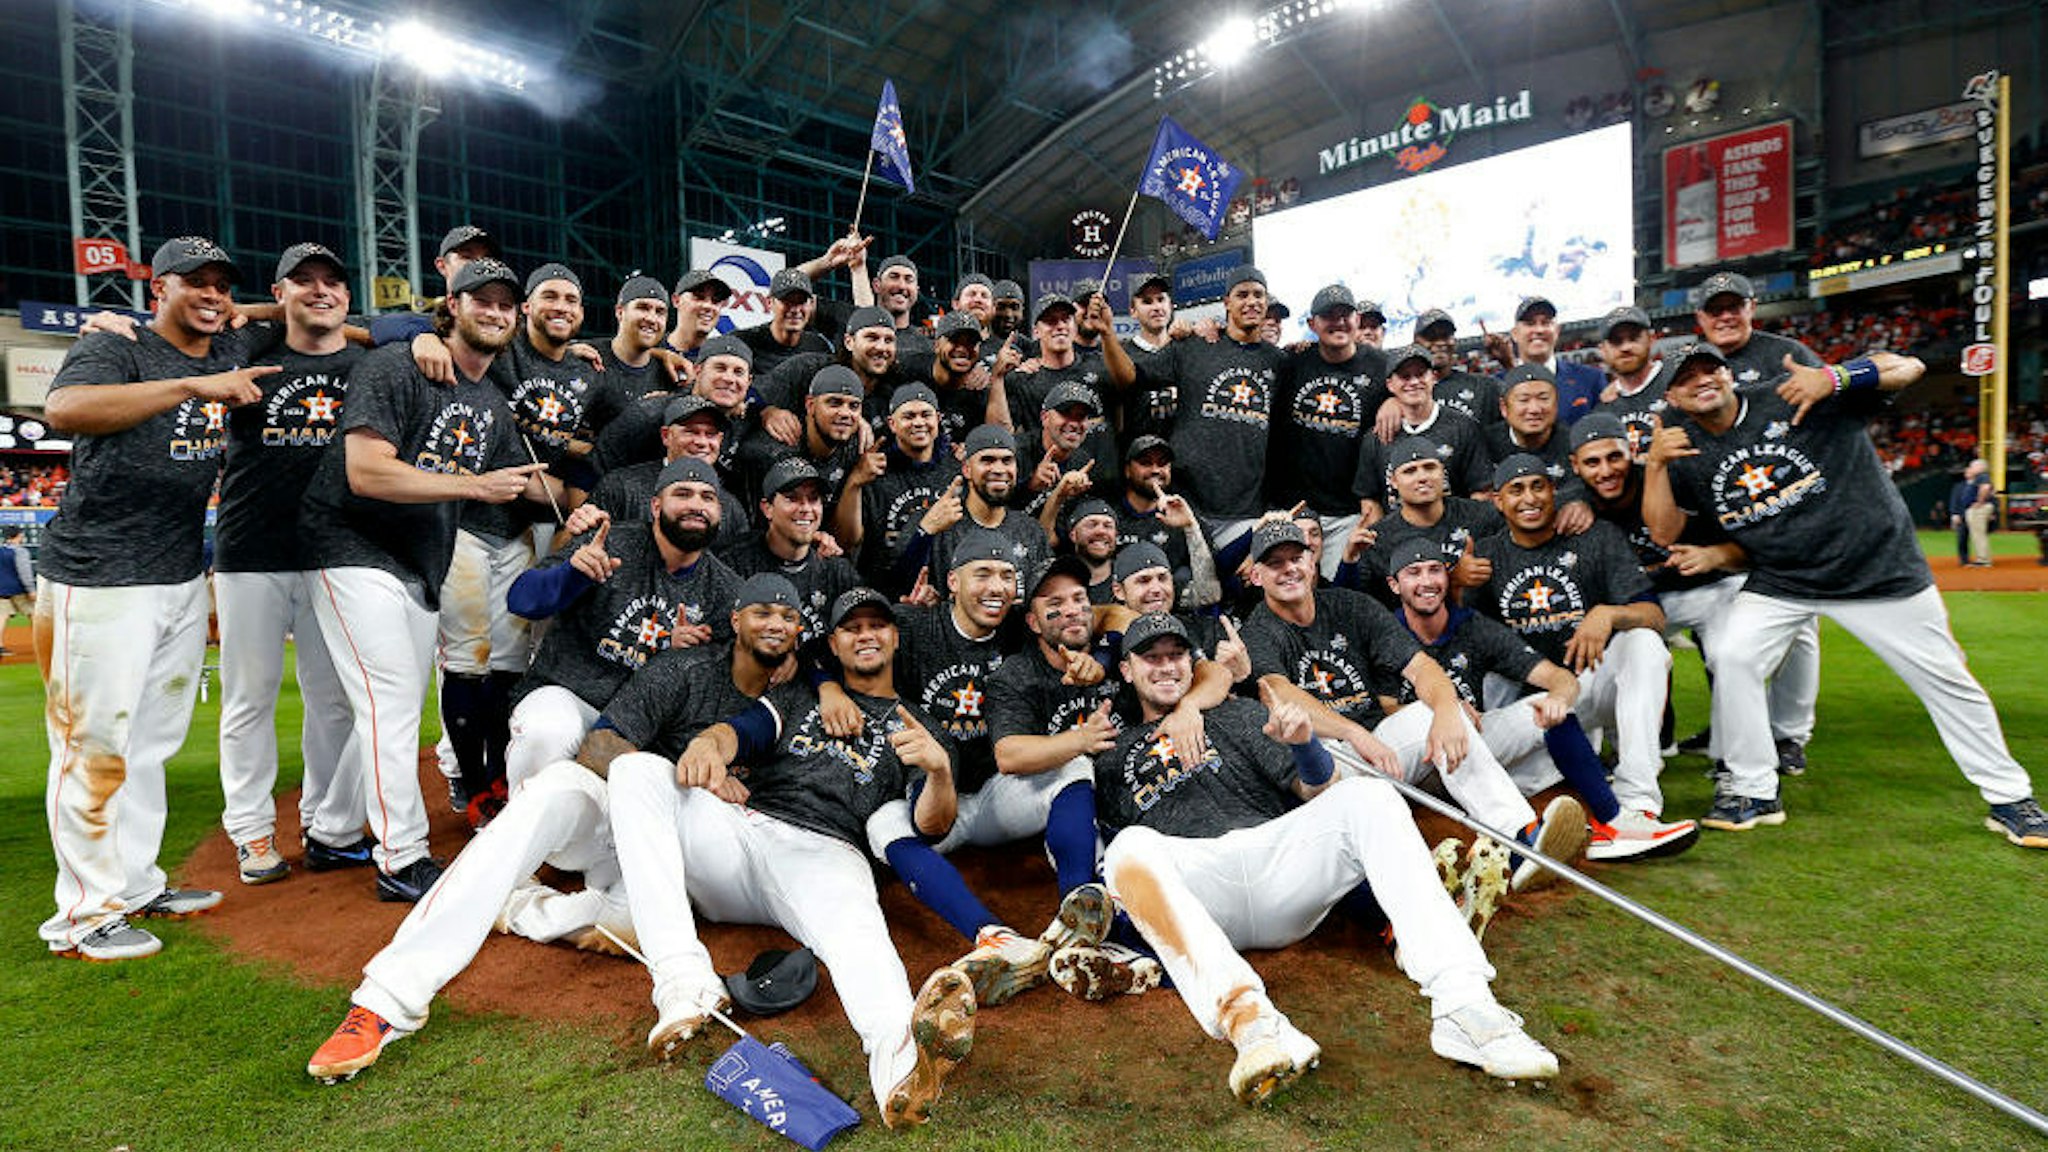 The Houston Astros pose for a photo as they celebrate their 6-4 win against the New York Yankees in game six of the American League Championship Series at Minute Maid Park on October 19, 2019 in Houston, Texas. (Photo by Elsa/Getty Images)